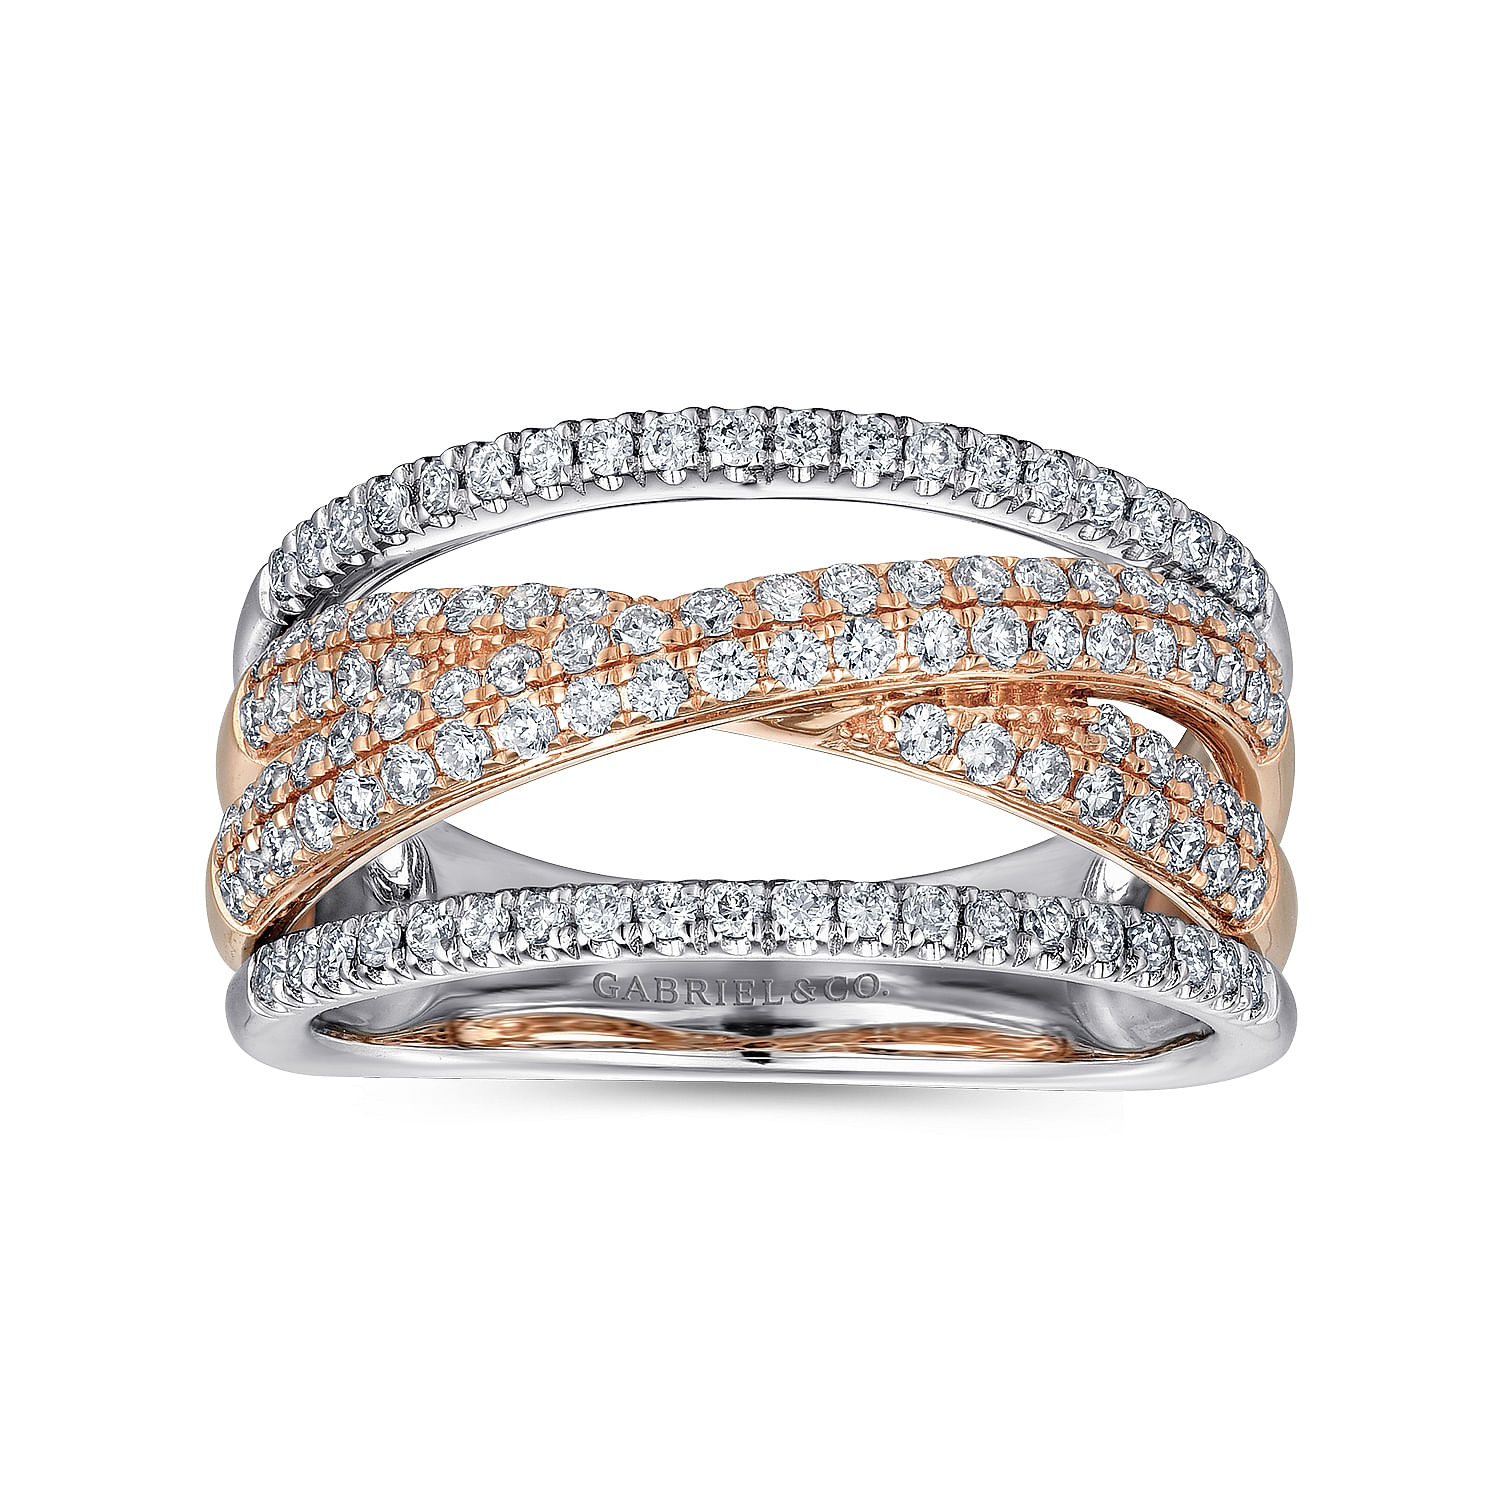 14K Rose and White Gold Criss Crossing Multi Row Diamond Ring